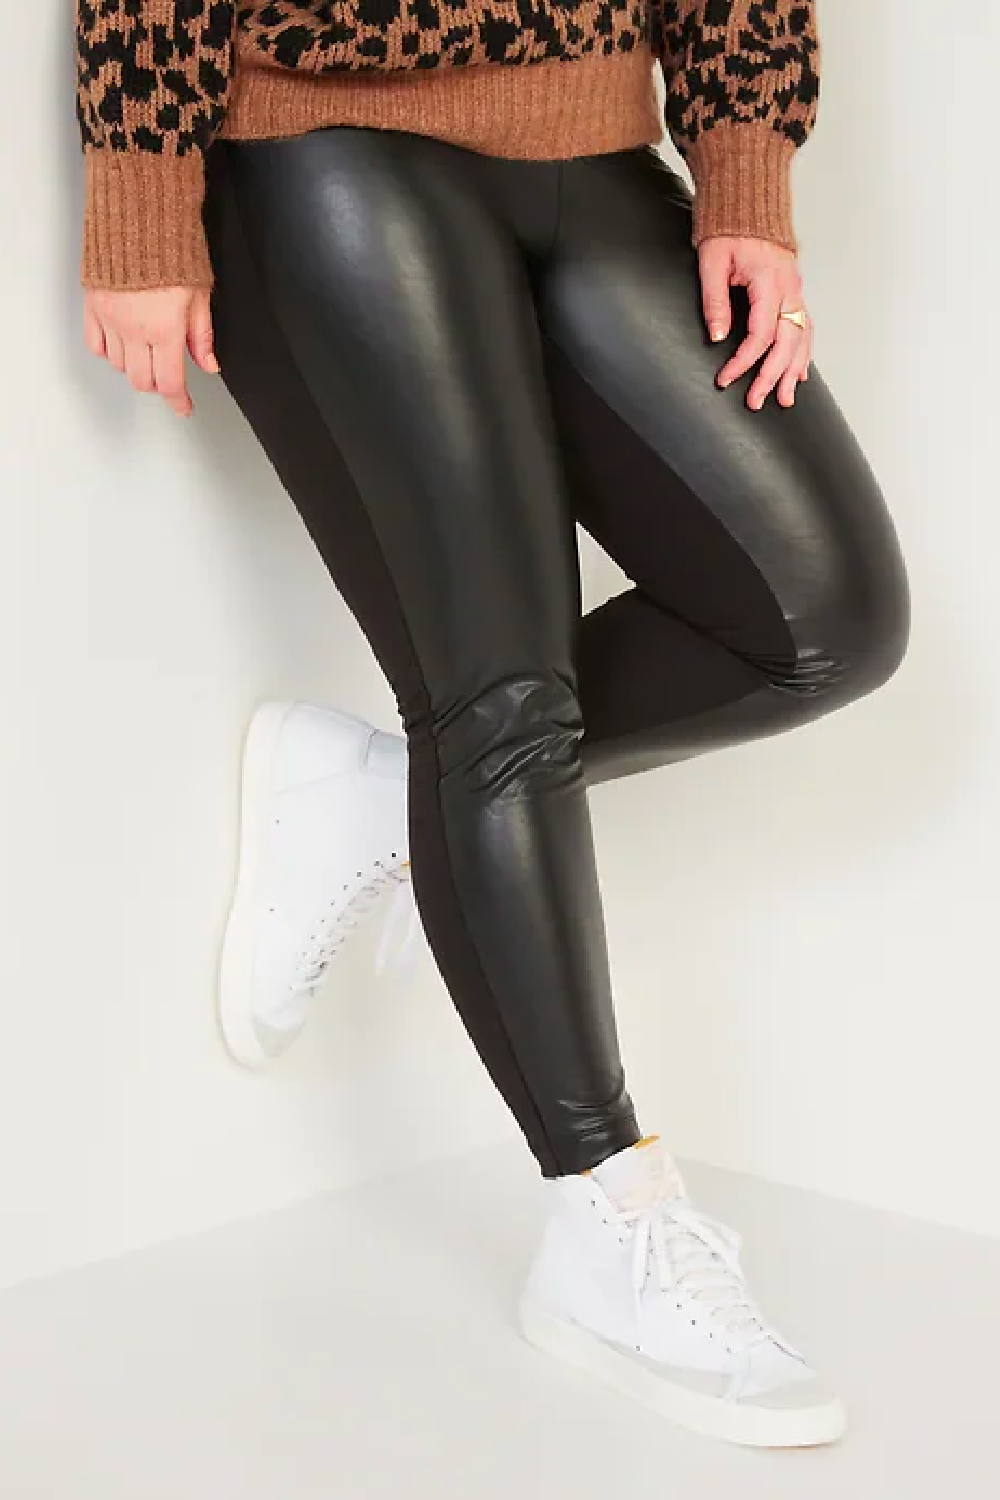 Leather Open Crotch Spanx Leather Leggings For Women Sexy Outdoor Sex Wear  With Gothic Butt Lift And Seamless PU Material Latex Pants 230816 From  Qiyuan03, $22.48 | DHgate.Com